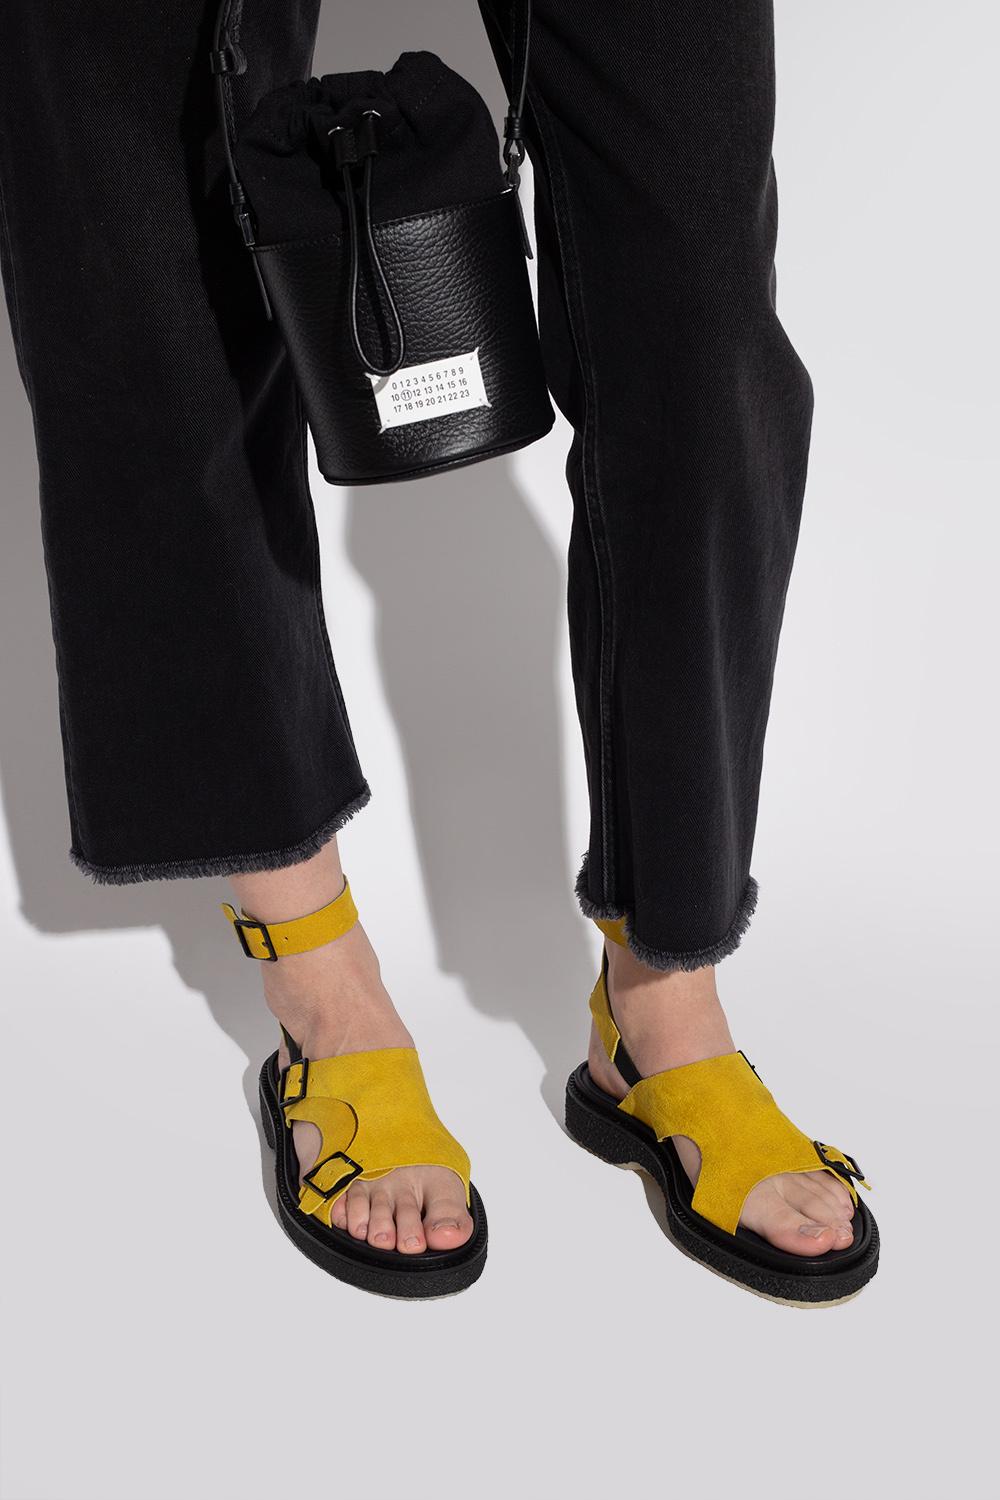 Adieu 'type 177' Sandals in Yellow | Lyst